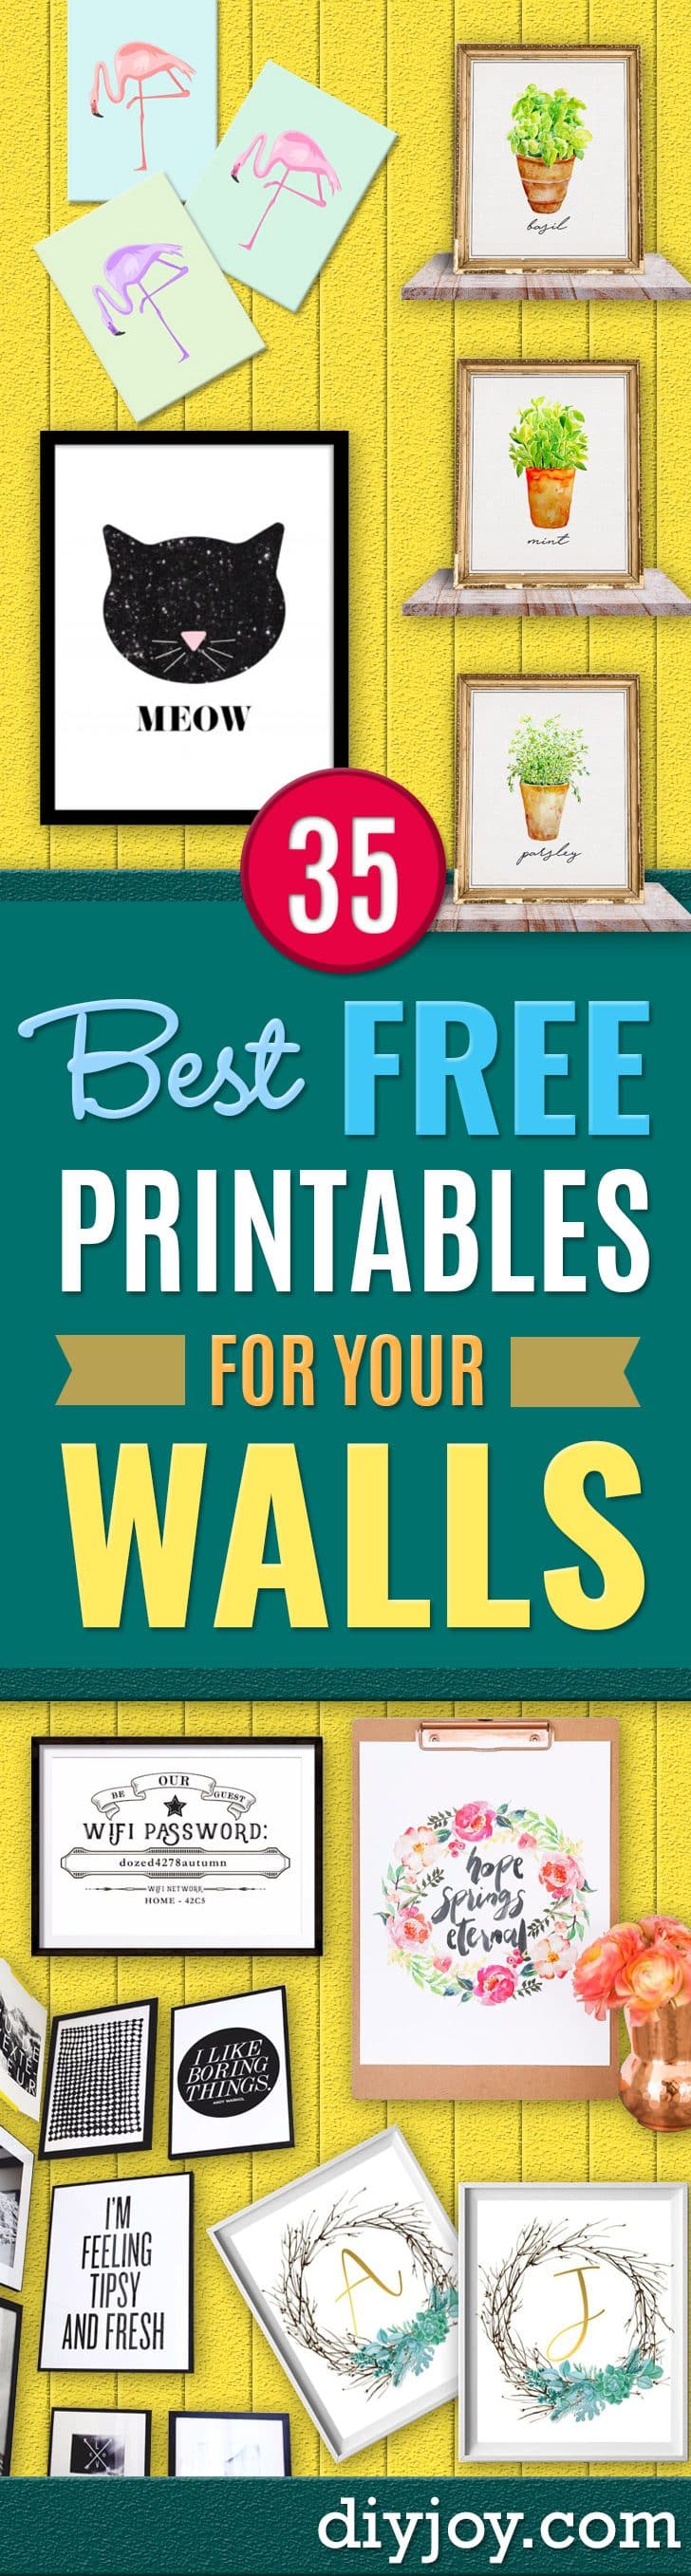 Free Printables For Your Walls - Easy Canvas Ideas With Free Downloadable Artwork and Quote Sayings - Best Free Prints for Wall Art and Picture to Print for Home and Bedroom Decor - Signs for the Home, Organization, Office - Quotes for Bedroom and Kitchens, Vintage Bathroom Pictures - Downloadable Printable for Kids - DIY and Crafts by DIY JOY